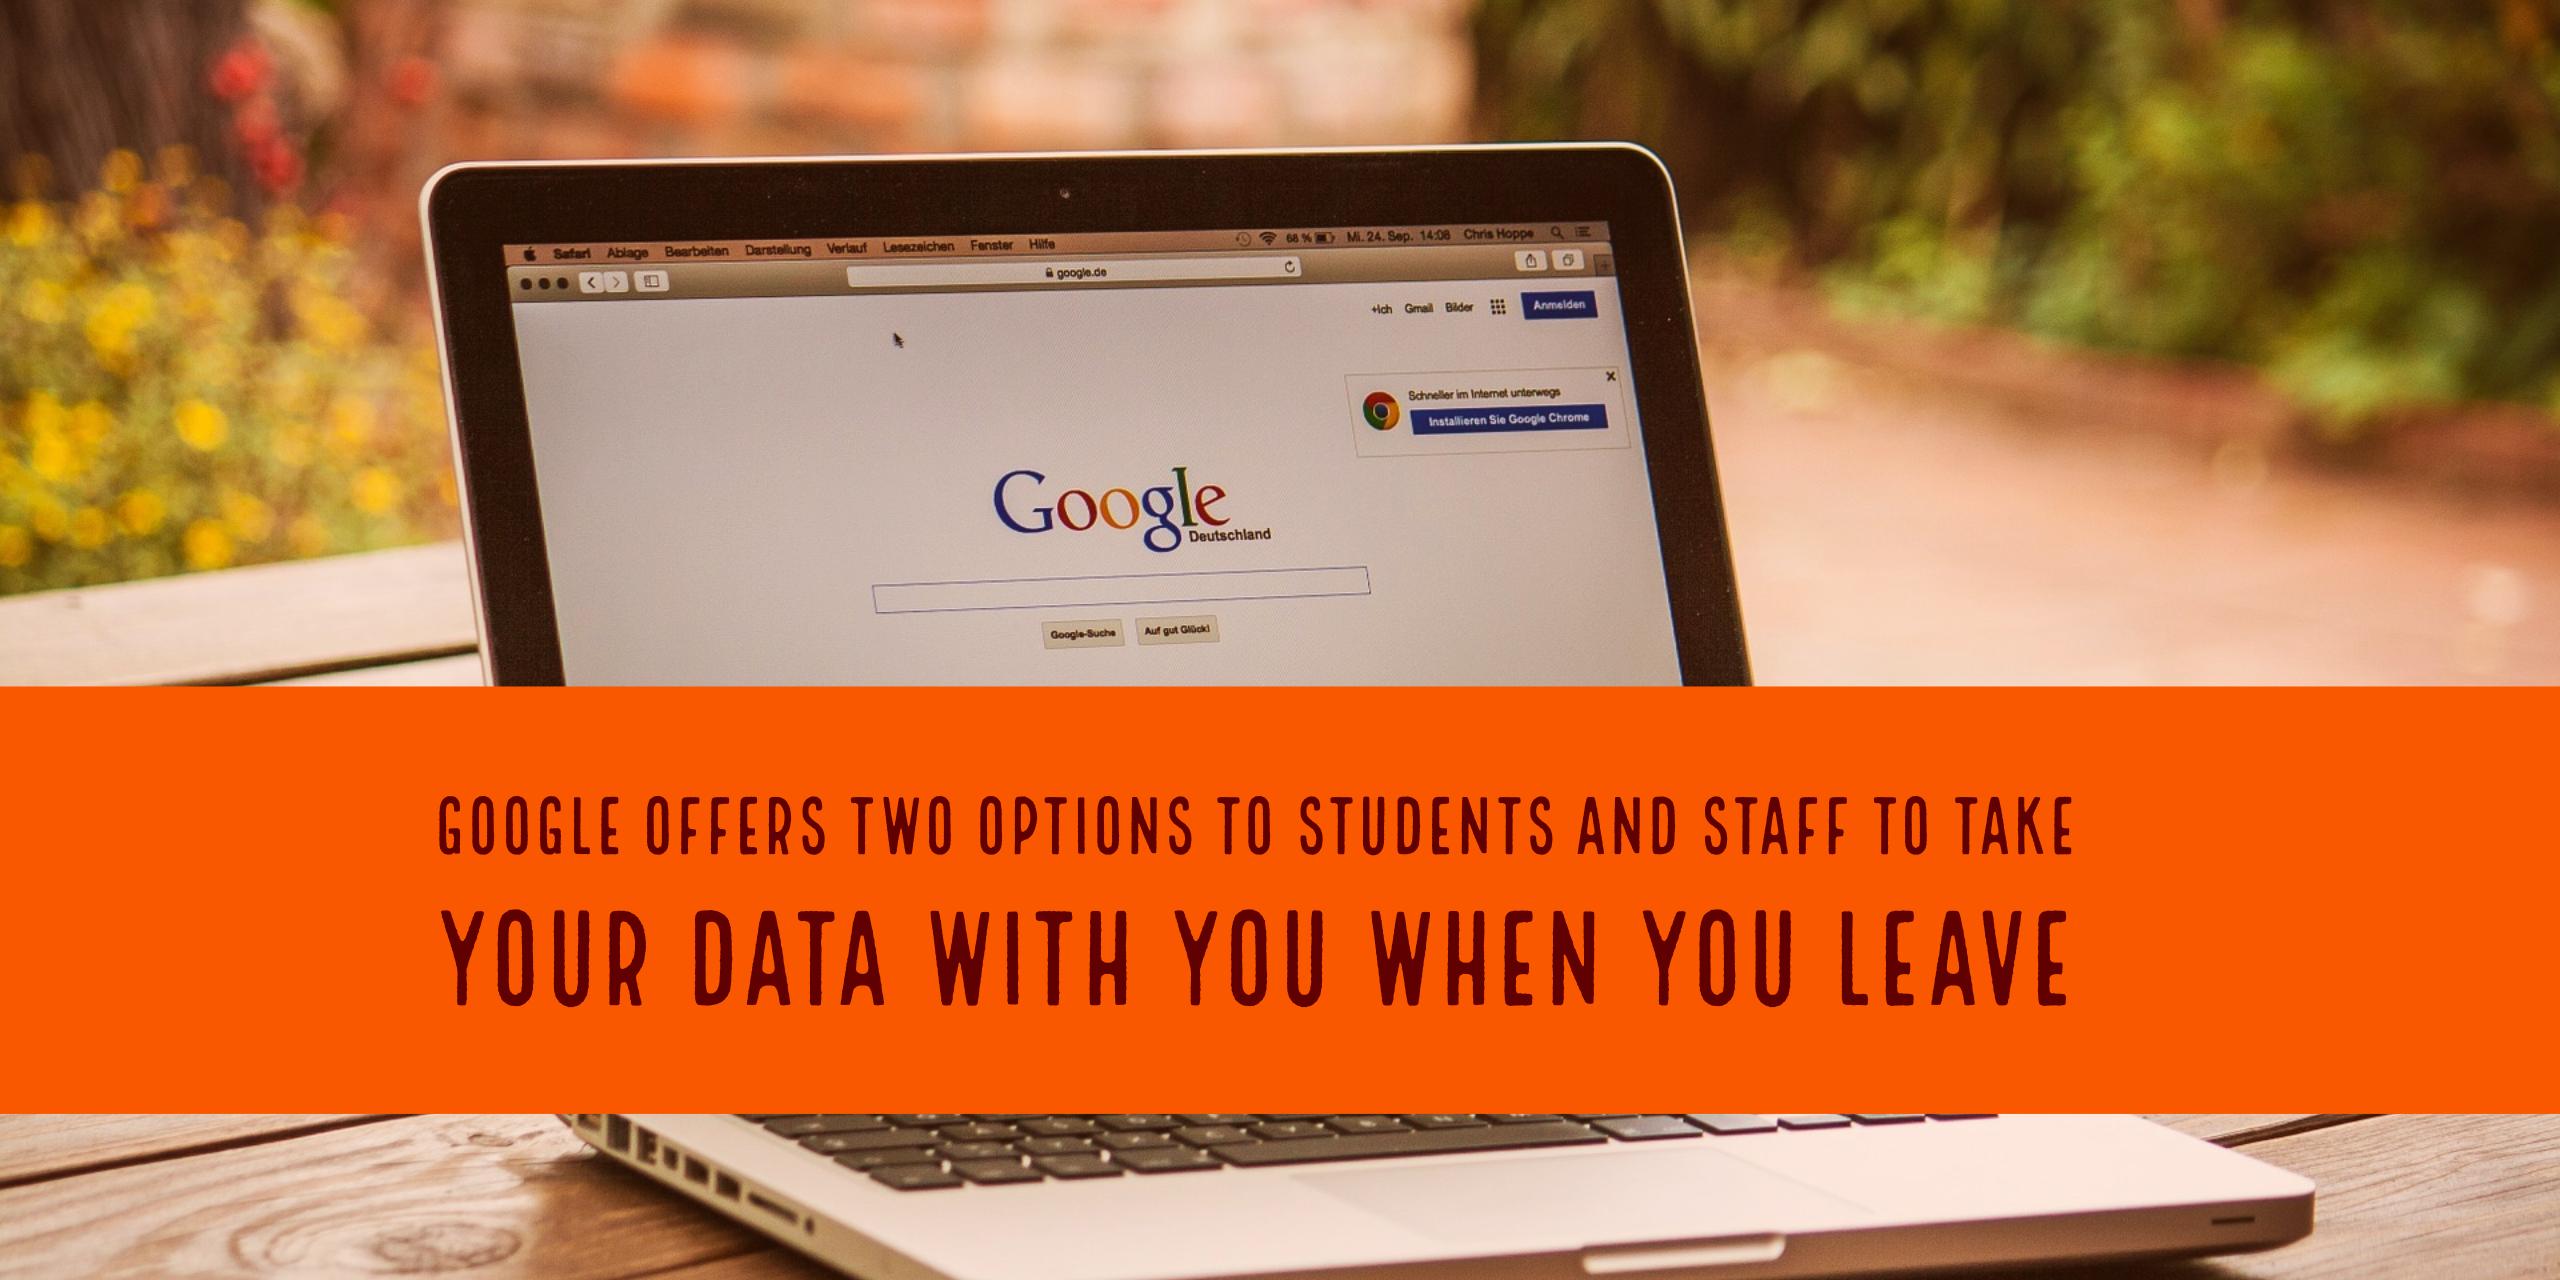 Google offers two options to students and staff to take your data with you when you leave